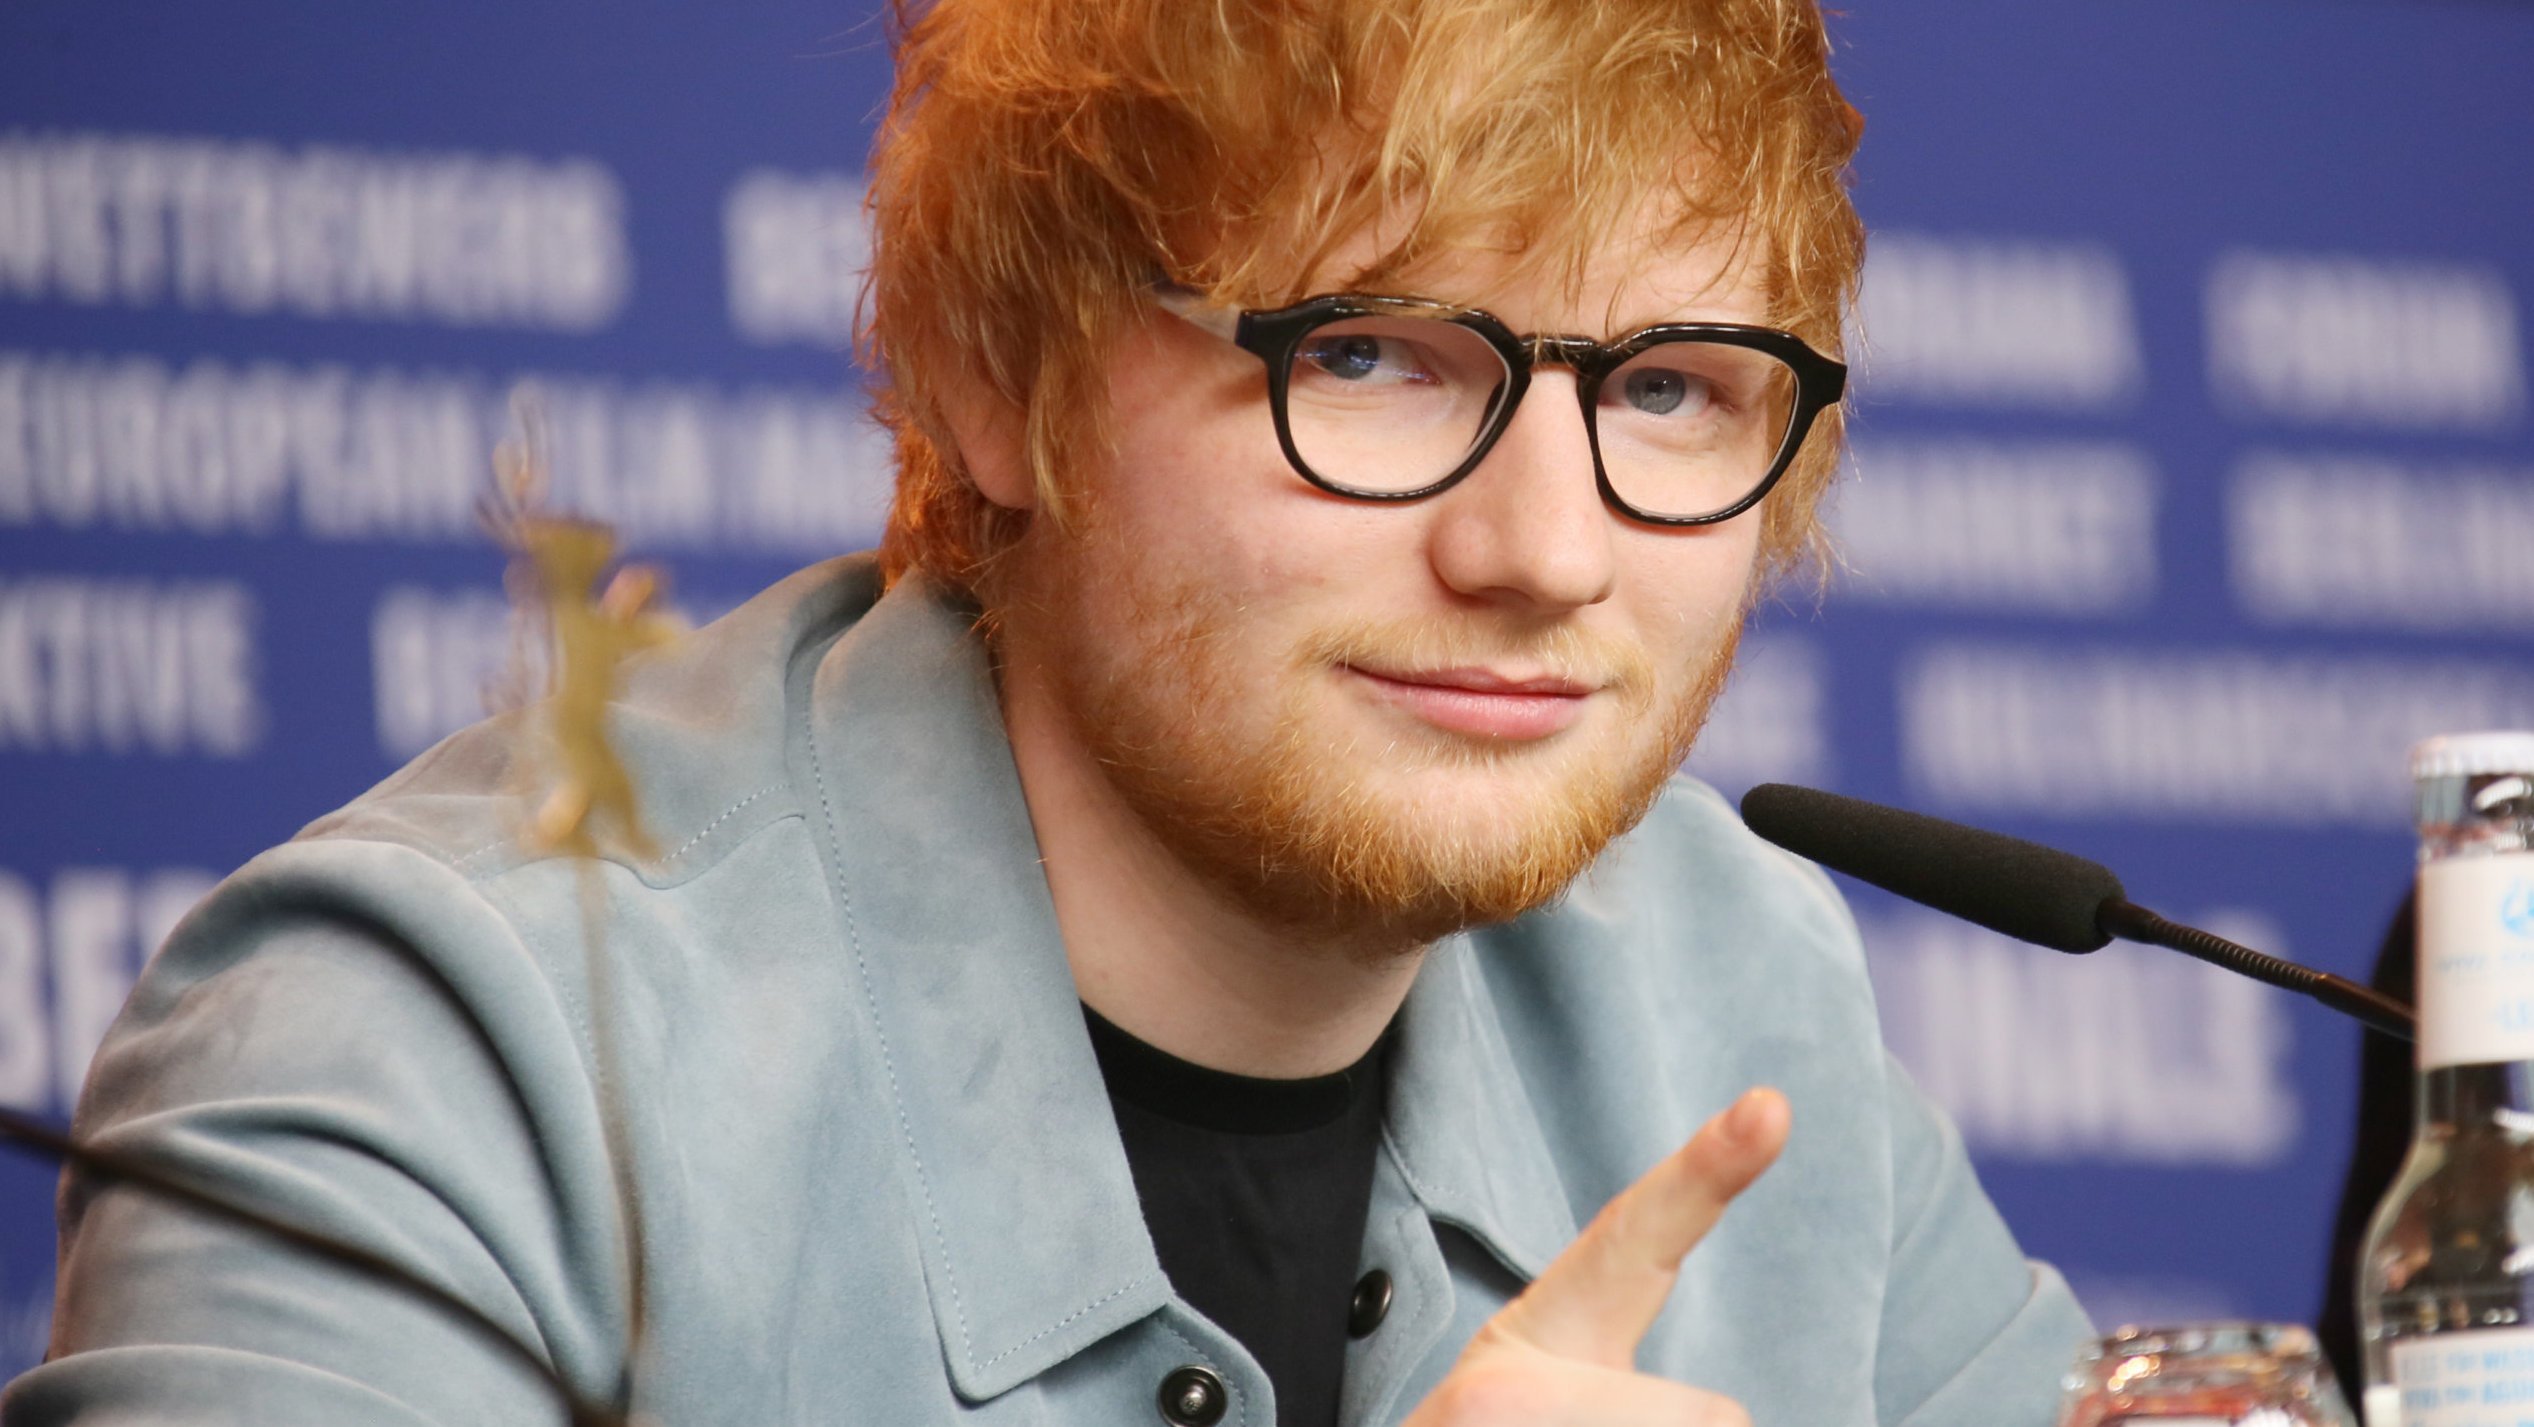 Hacker who stole Ed Sheeran’s unreleased music to sell for crypto gets 18-month jail term in the UK – Music Business Worldwide